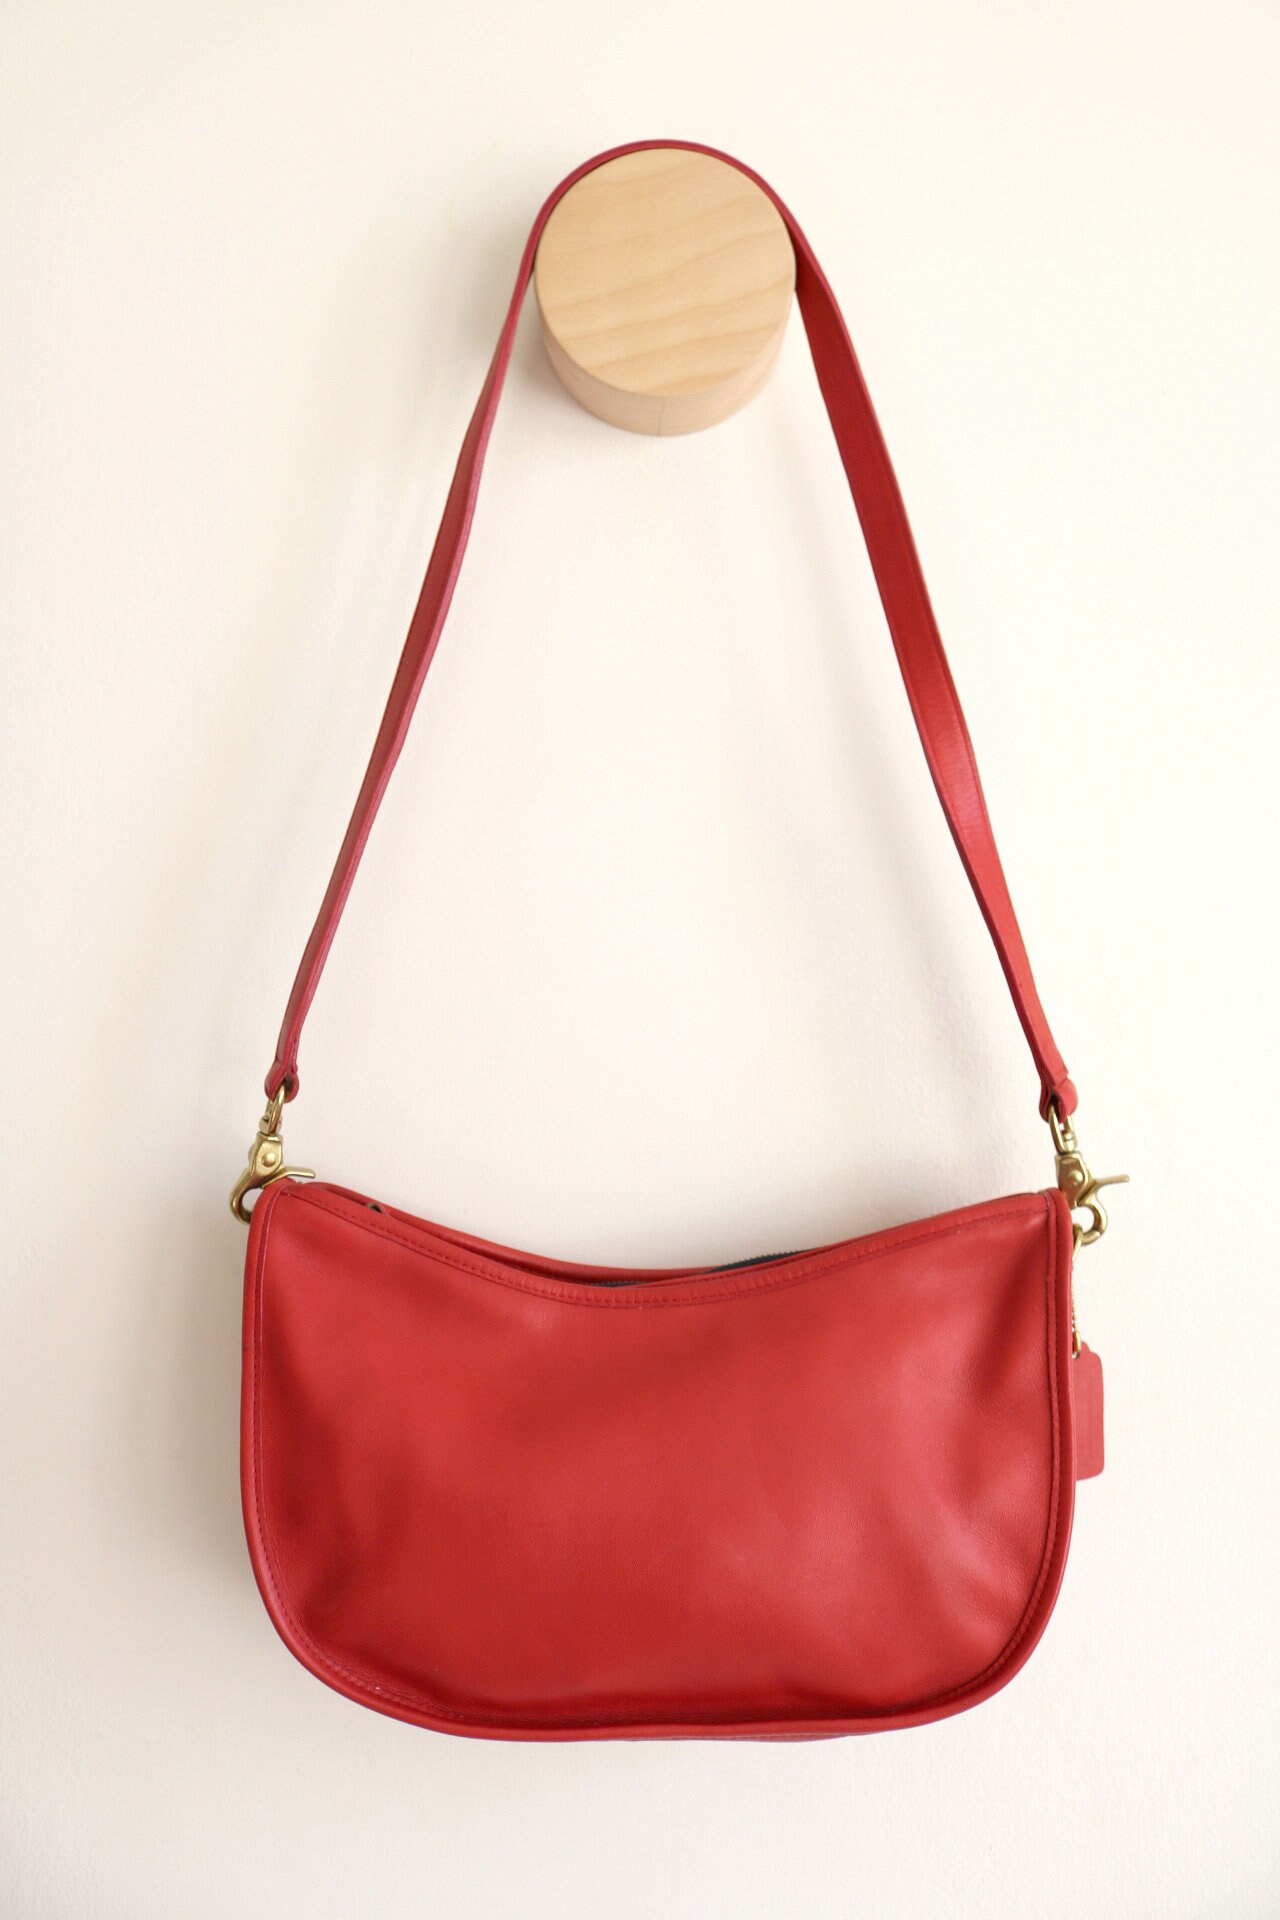 Coach Large Swinger Bag Red Leather